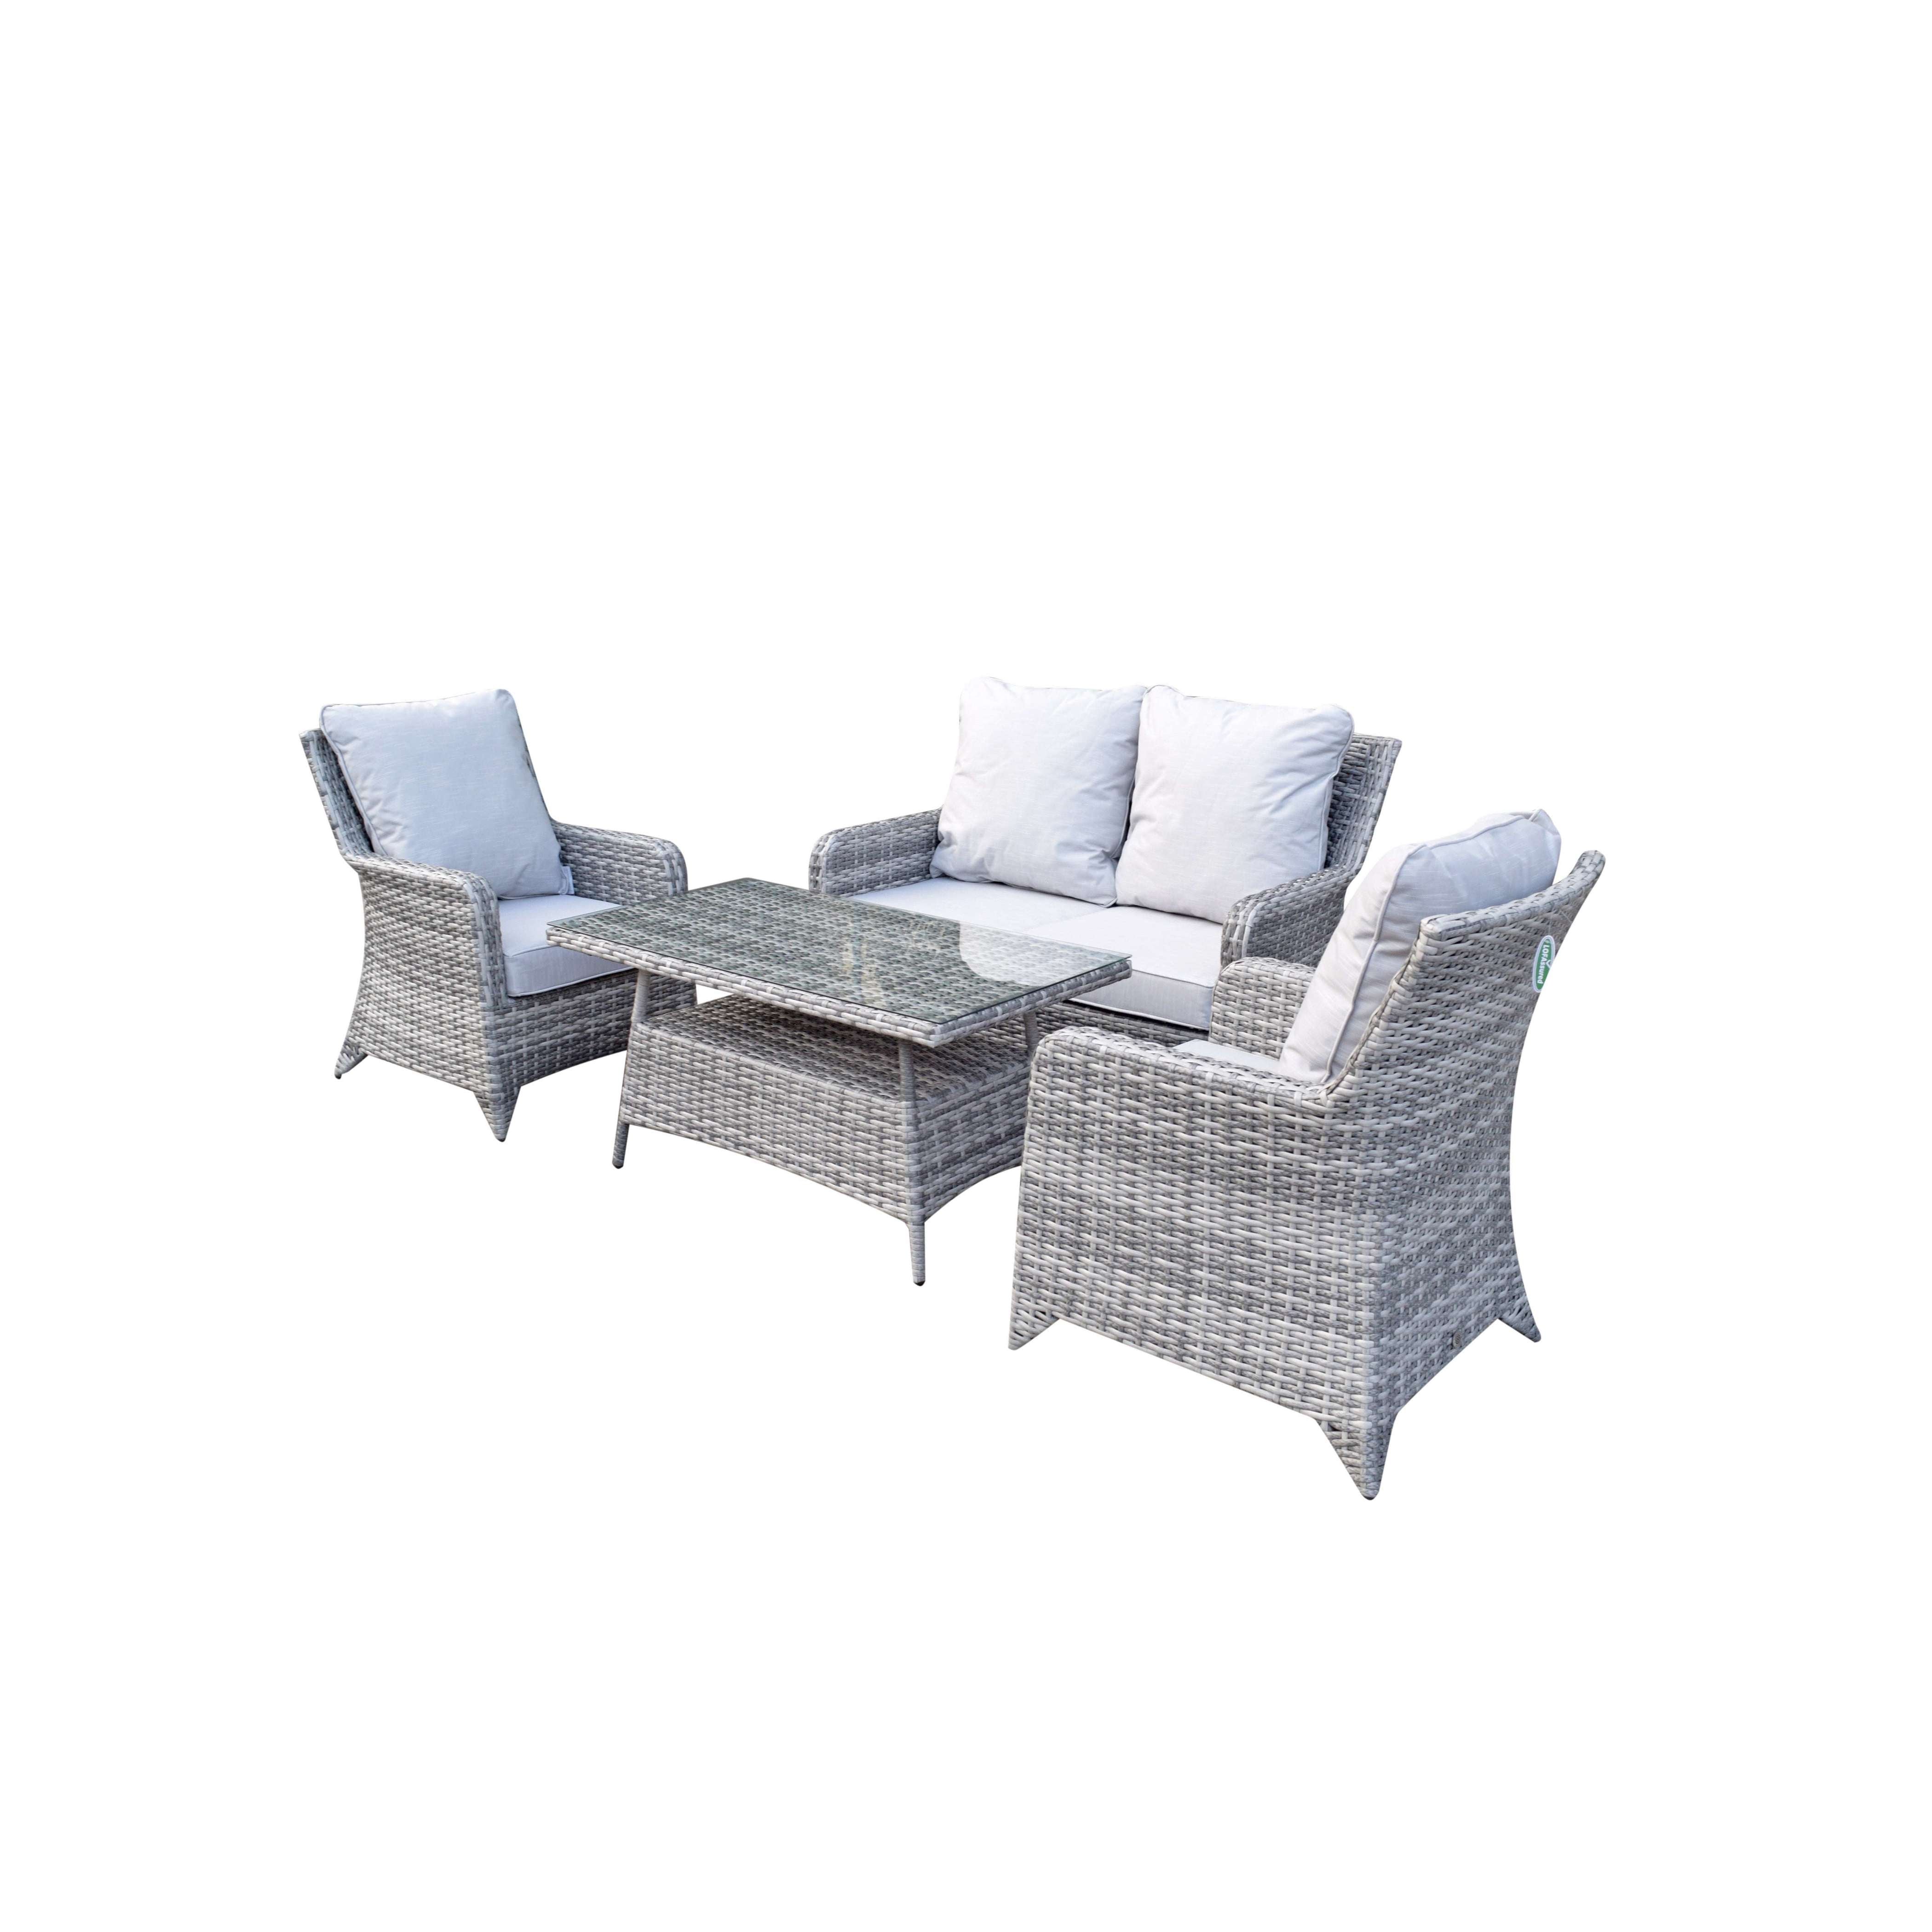 Exceptional Garden:Signature Weave Sarah 4-Seater Sofa Set with New Coffee Table Design - Grey